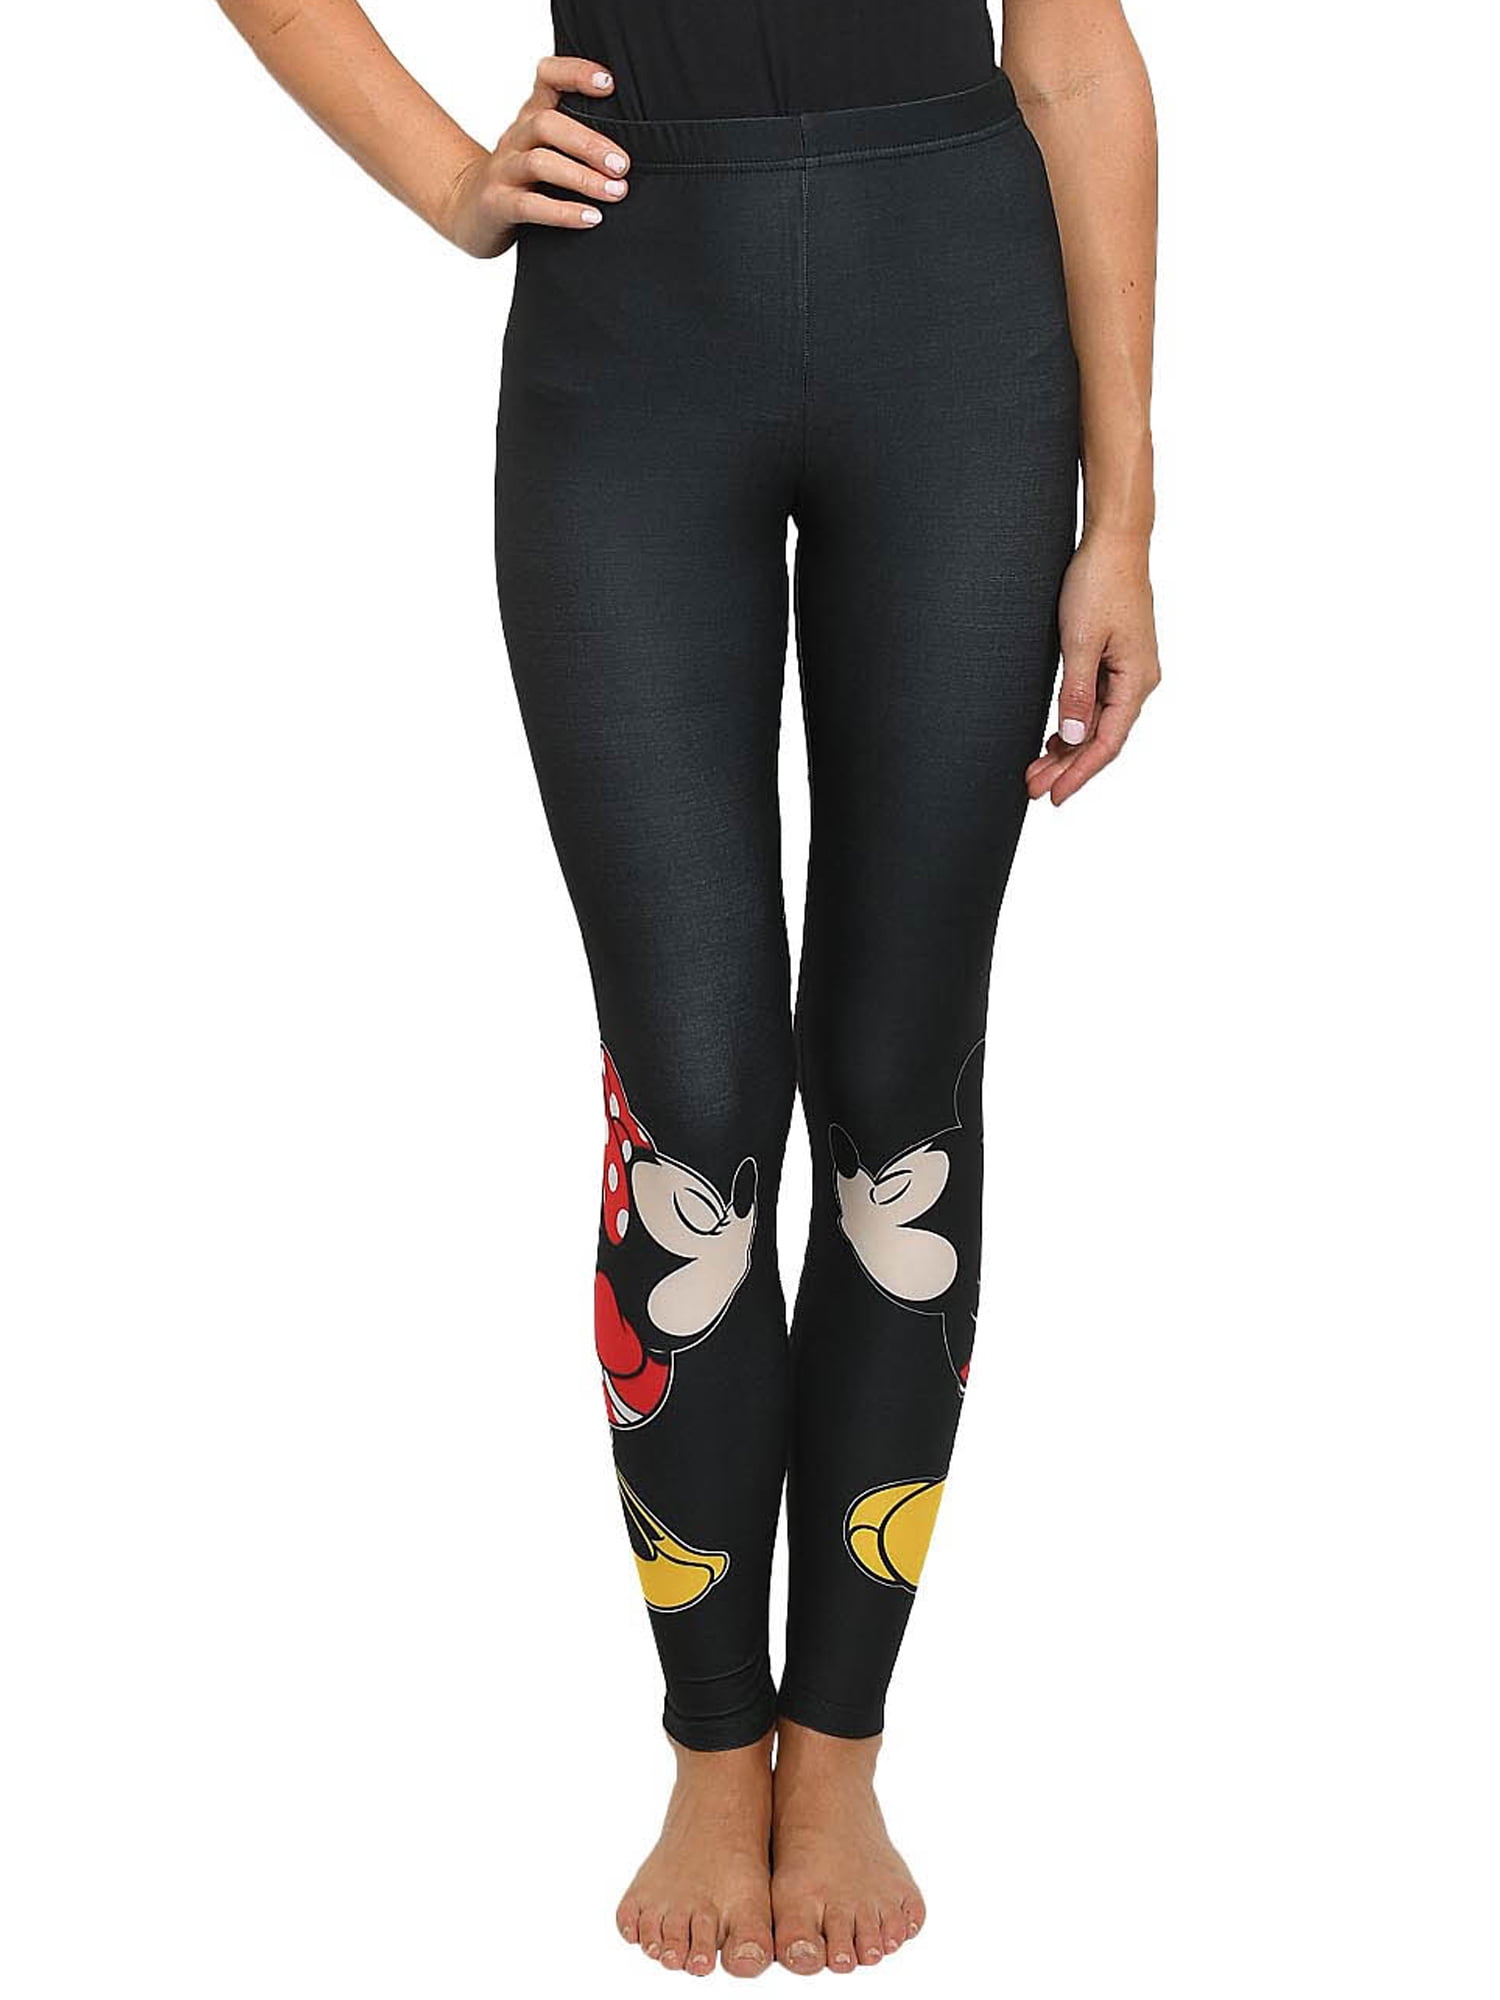 Disney Junior Mickey and Minnie Mouse Kissing Leggings Stretch